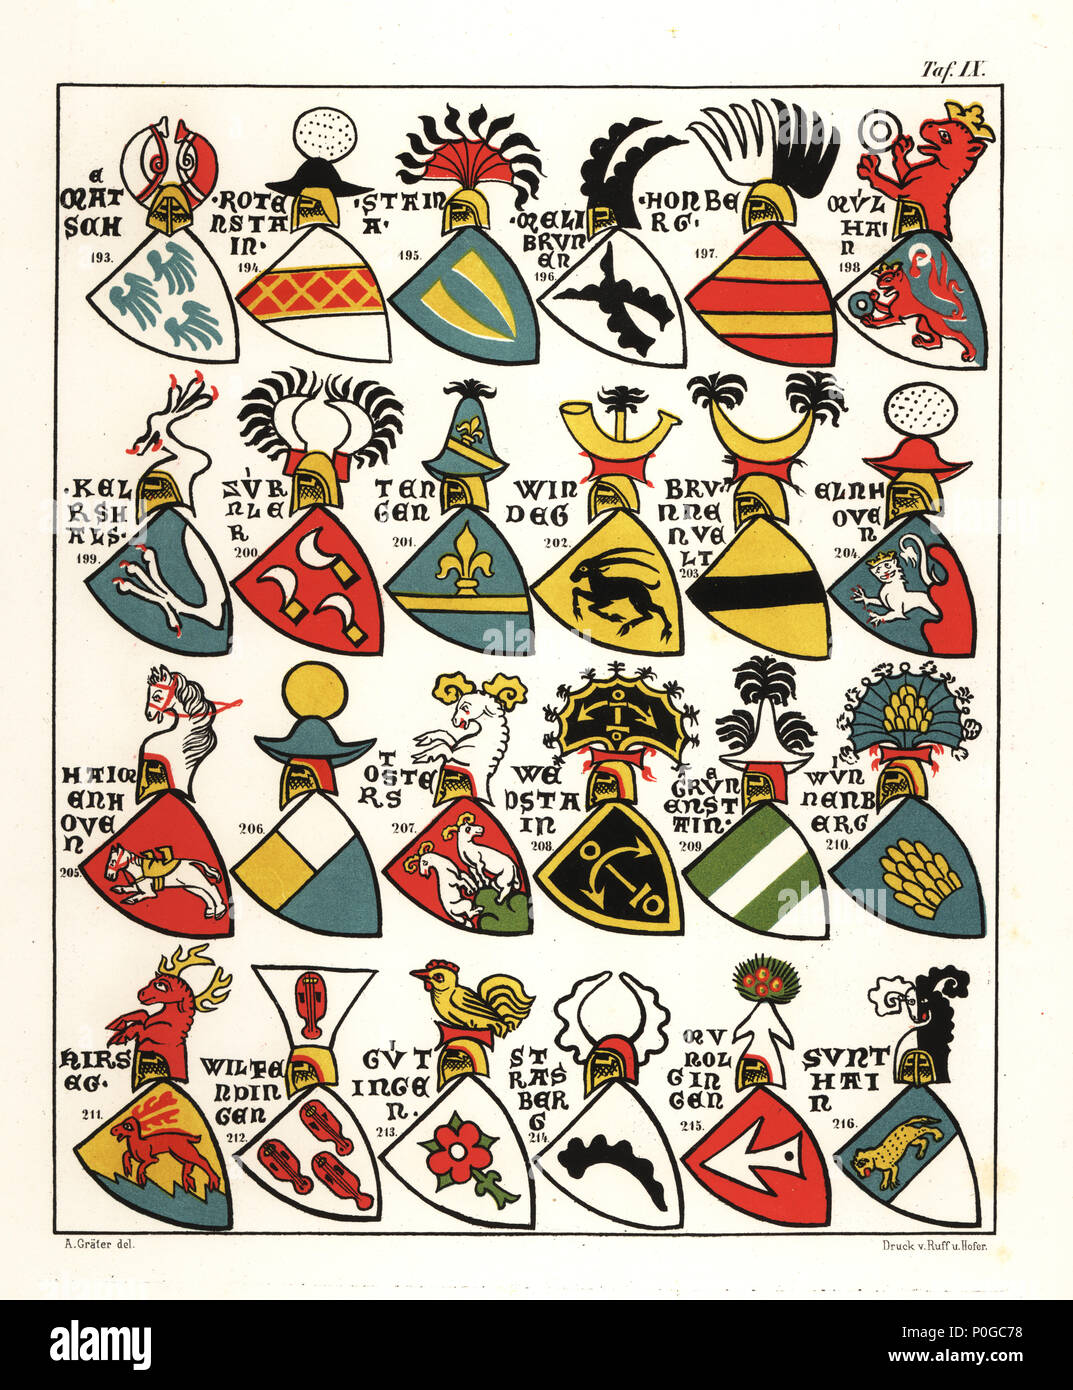 Swiss coats of arms, c. 1340. Chromolithograph by A. Graeter from Die Wappenrolle von Zurich, The Zurich Armorial, Antiquarische Gesellschaft in Zurich, 1860. Reprint of a 14th century manuscript roll of arms showing the heraldry of the Holy Roman Empire with 559 coats of arms and 28 flags of bishoprics in Switzerland. Stock Photo